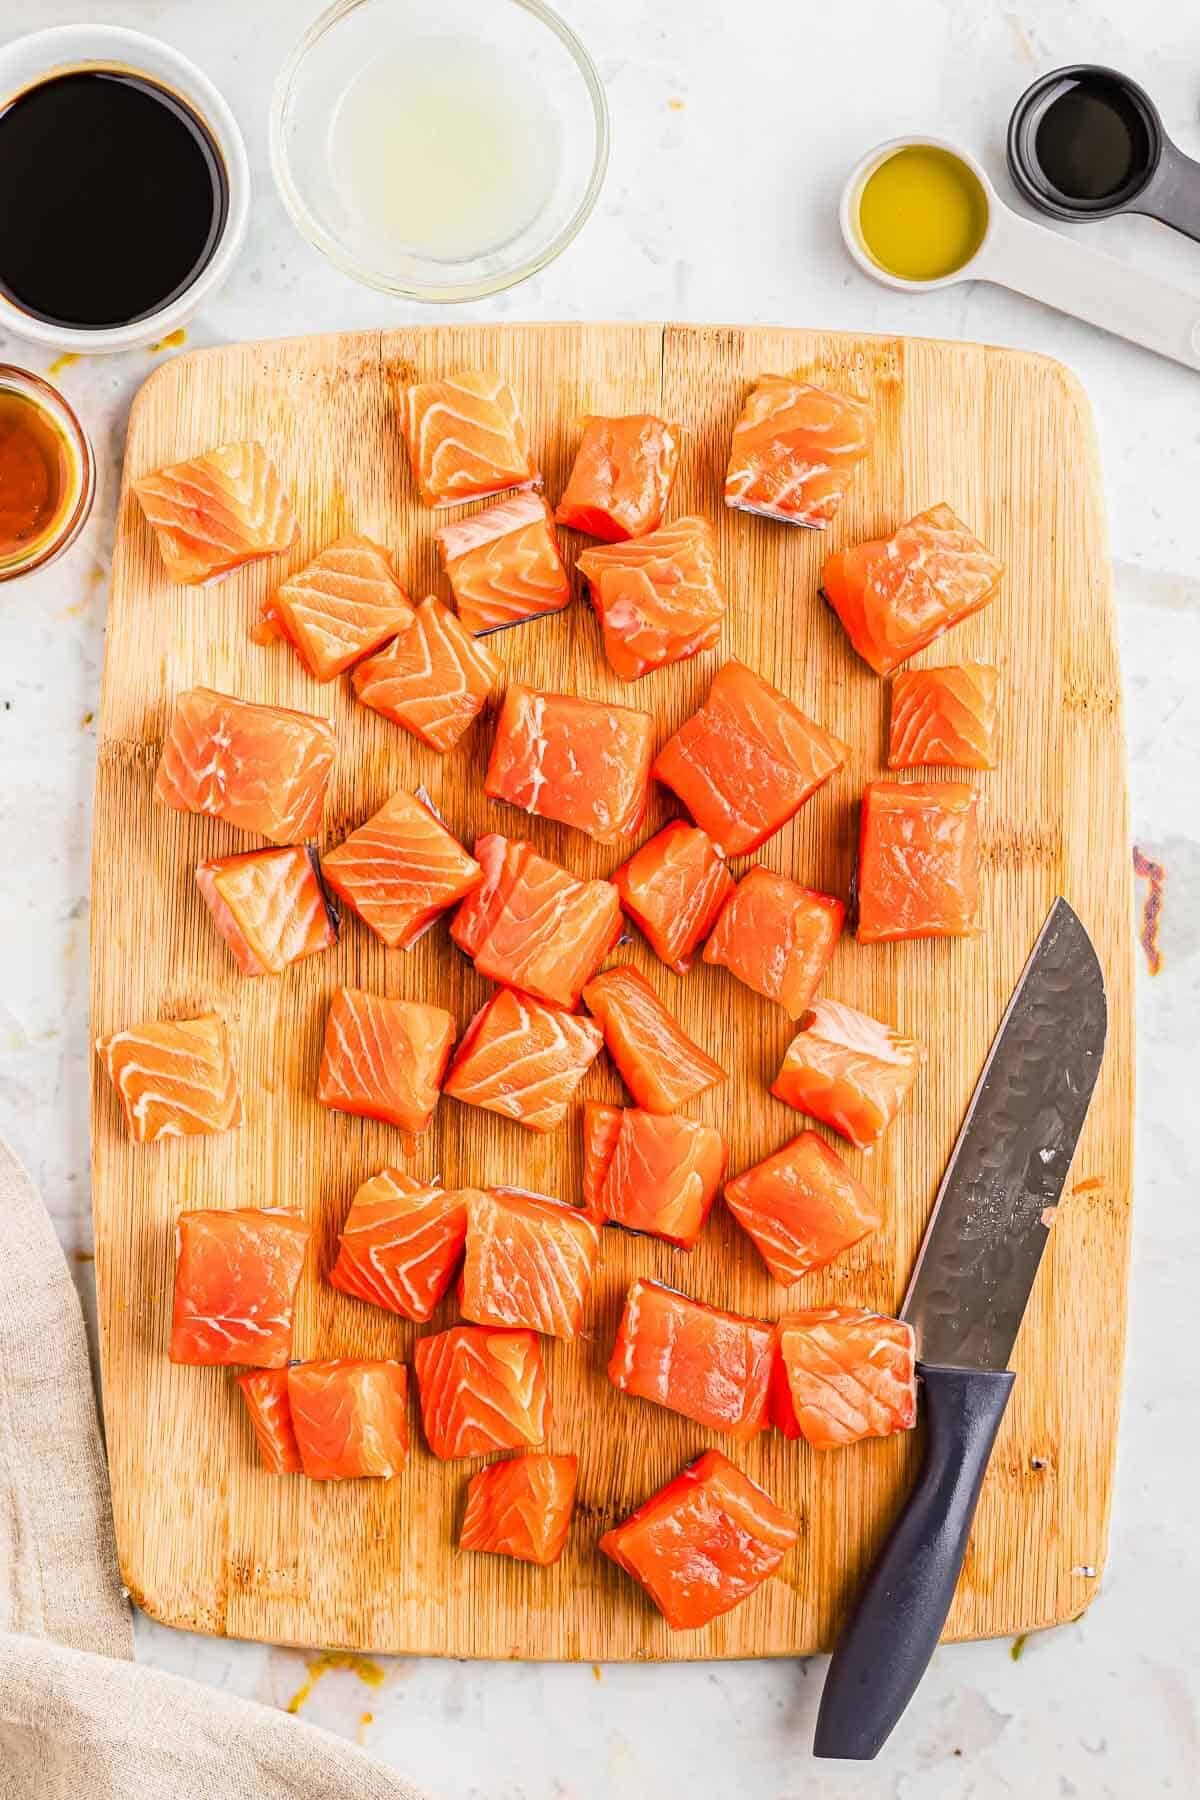 Salmon cut into bite-sized pieces on a wooden cutting board with a knife.